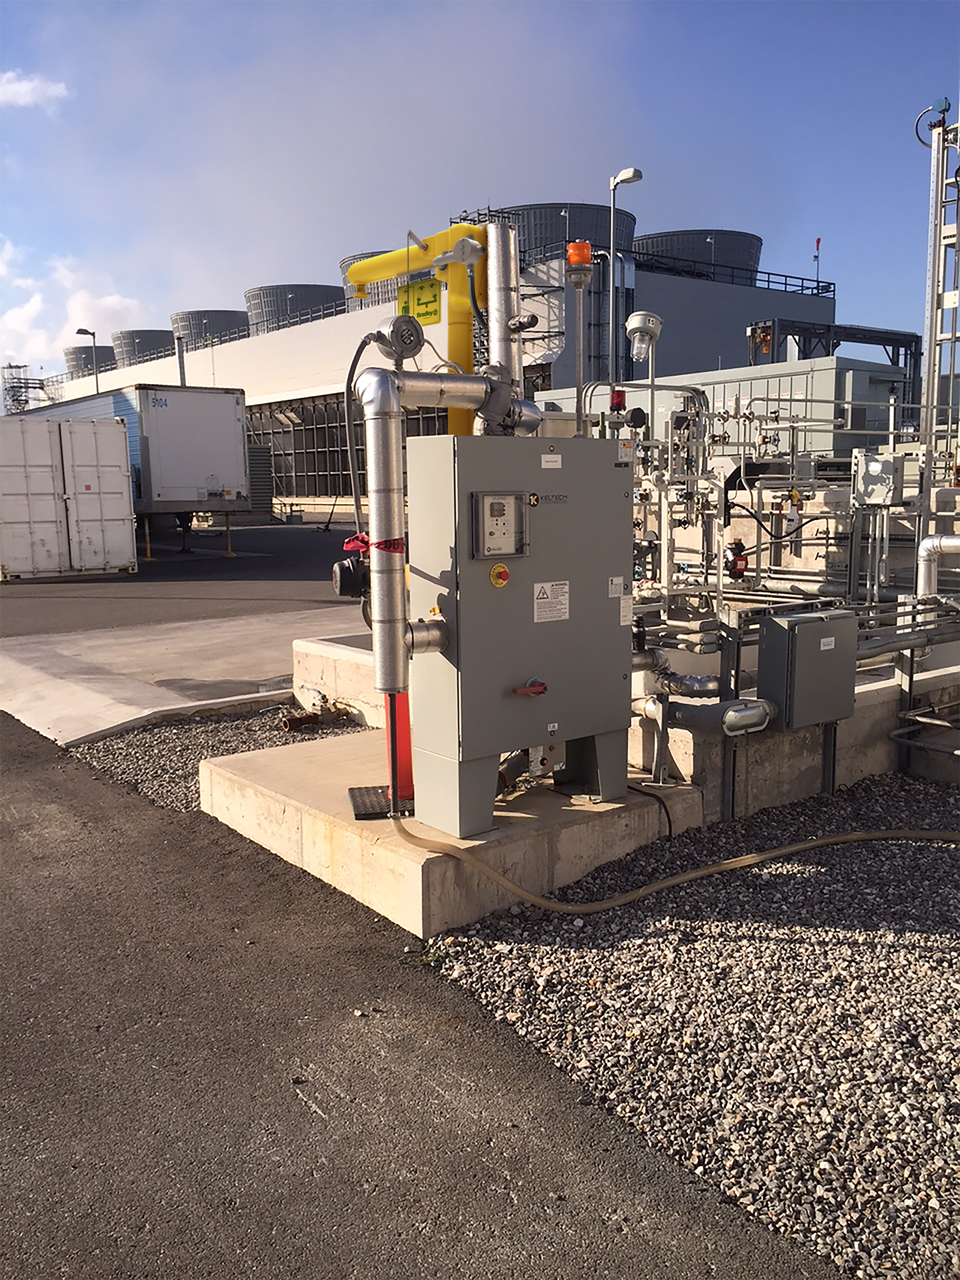 Freeze Protected Skid System, Heat Trace